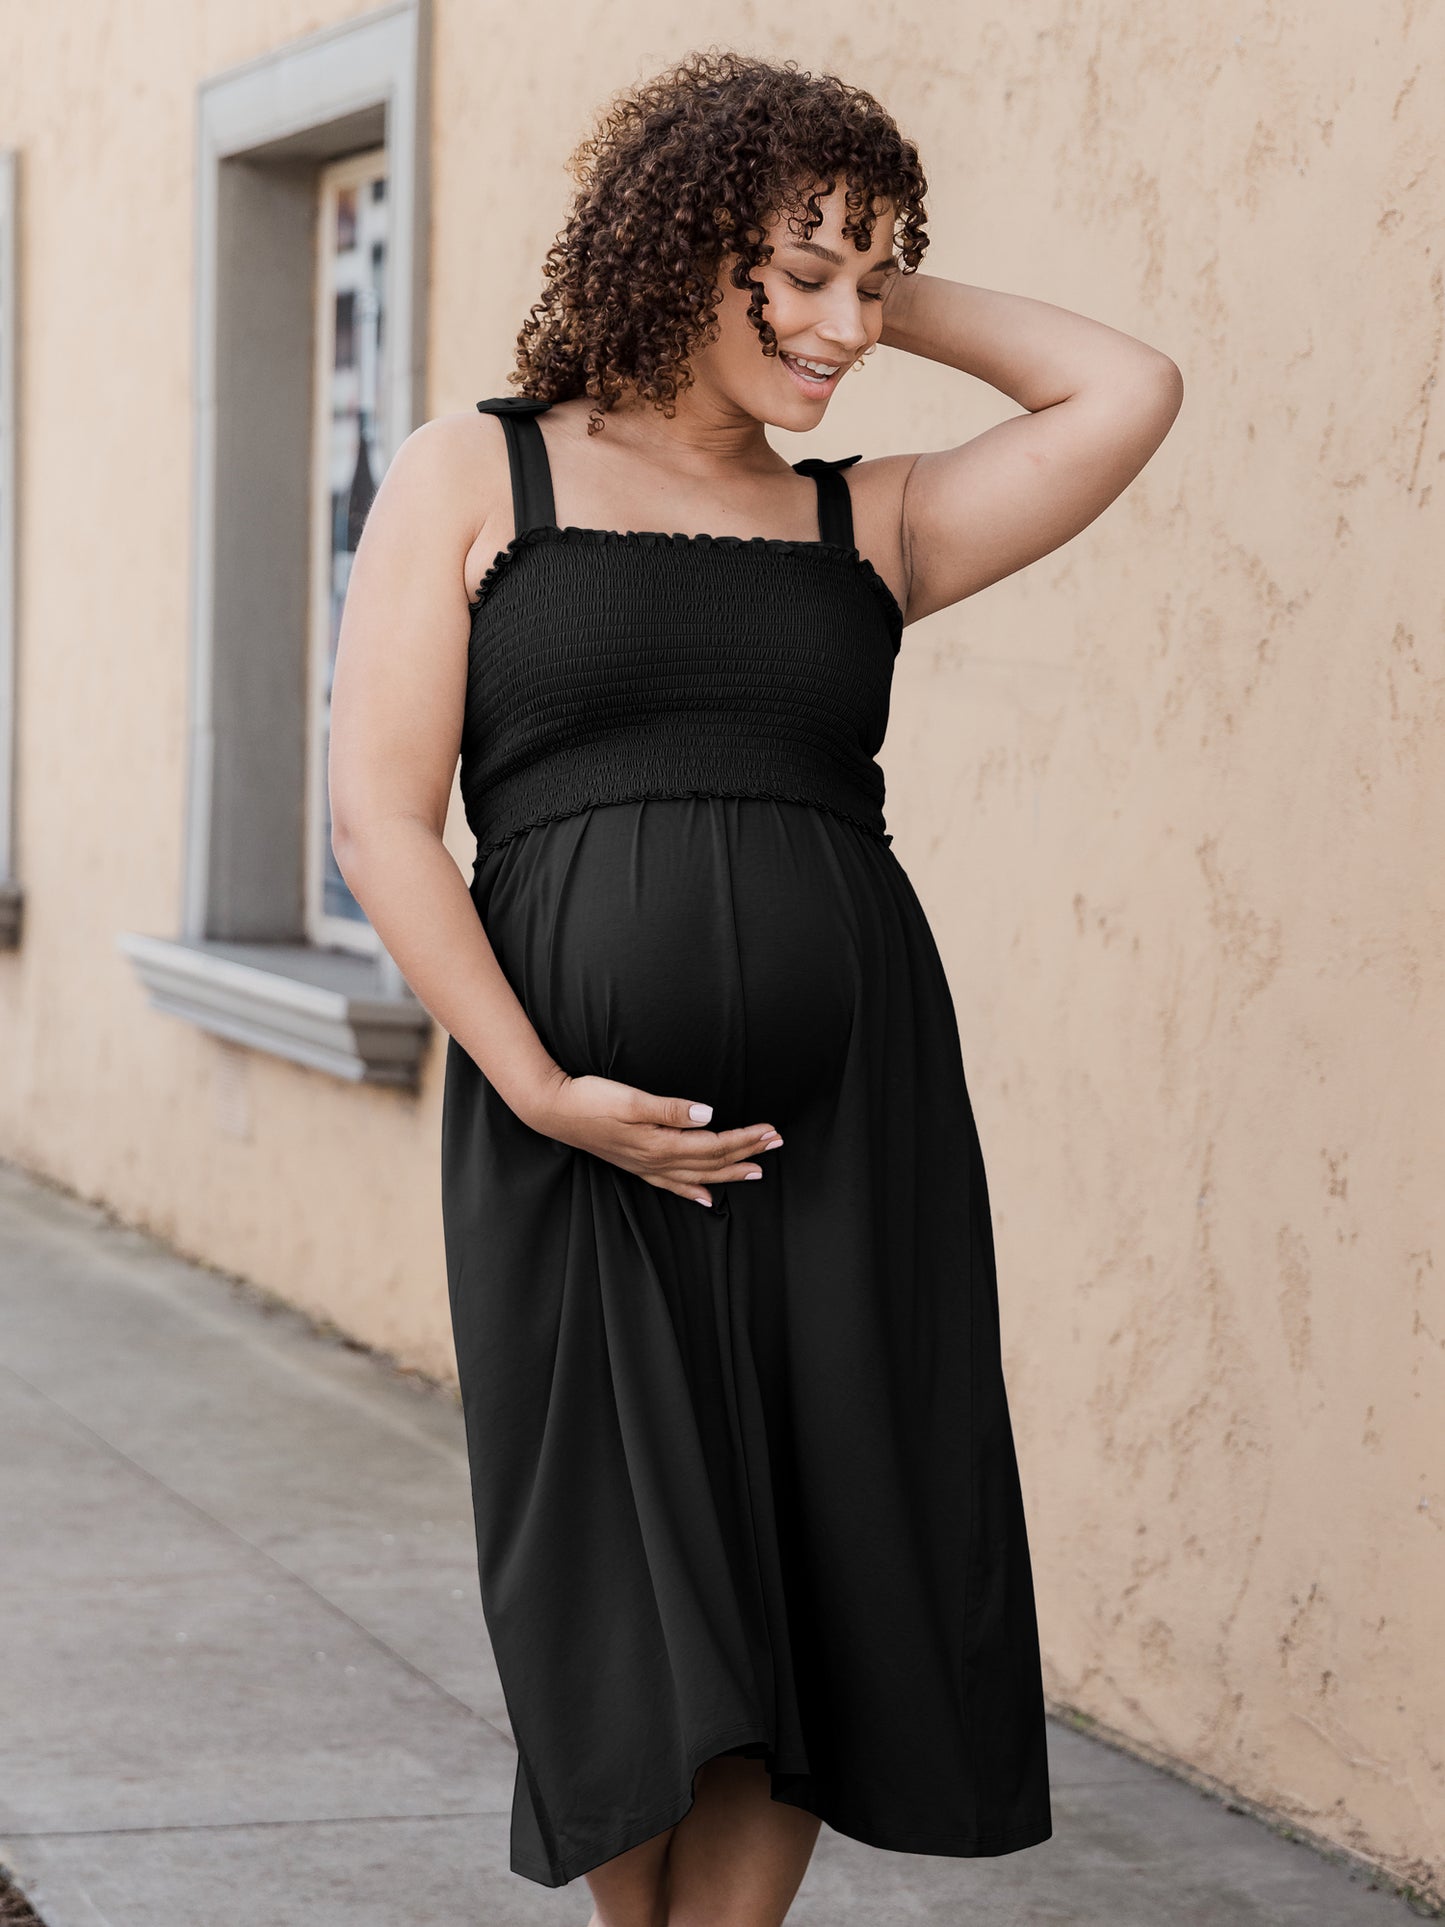 Pregnant model wearing the Sienna Smocked Maternity & Nursing Dress - black@model_info:Alysha is 5'6" and wearing a Large.